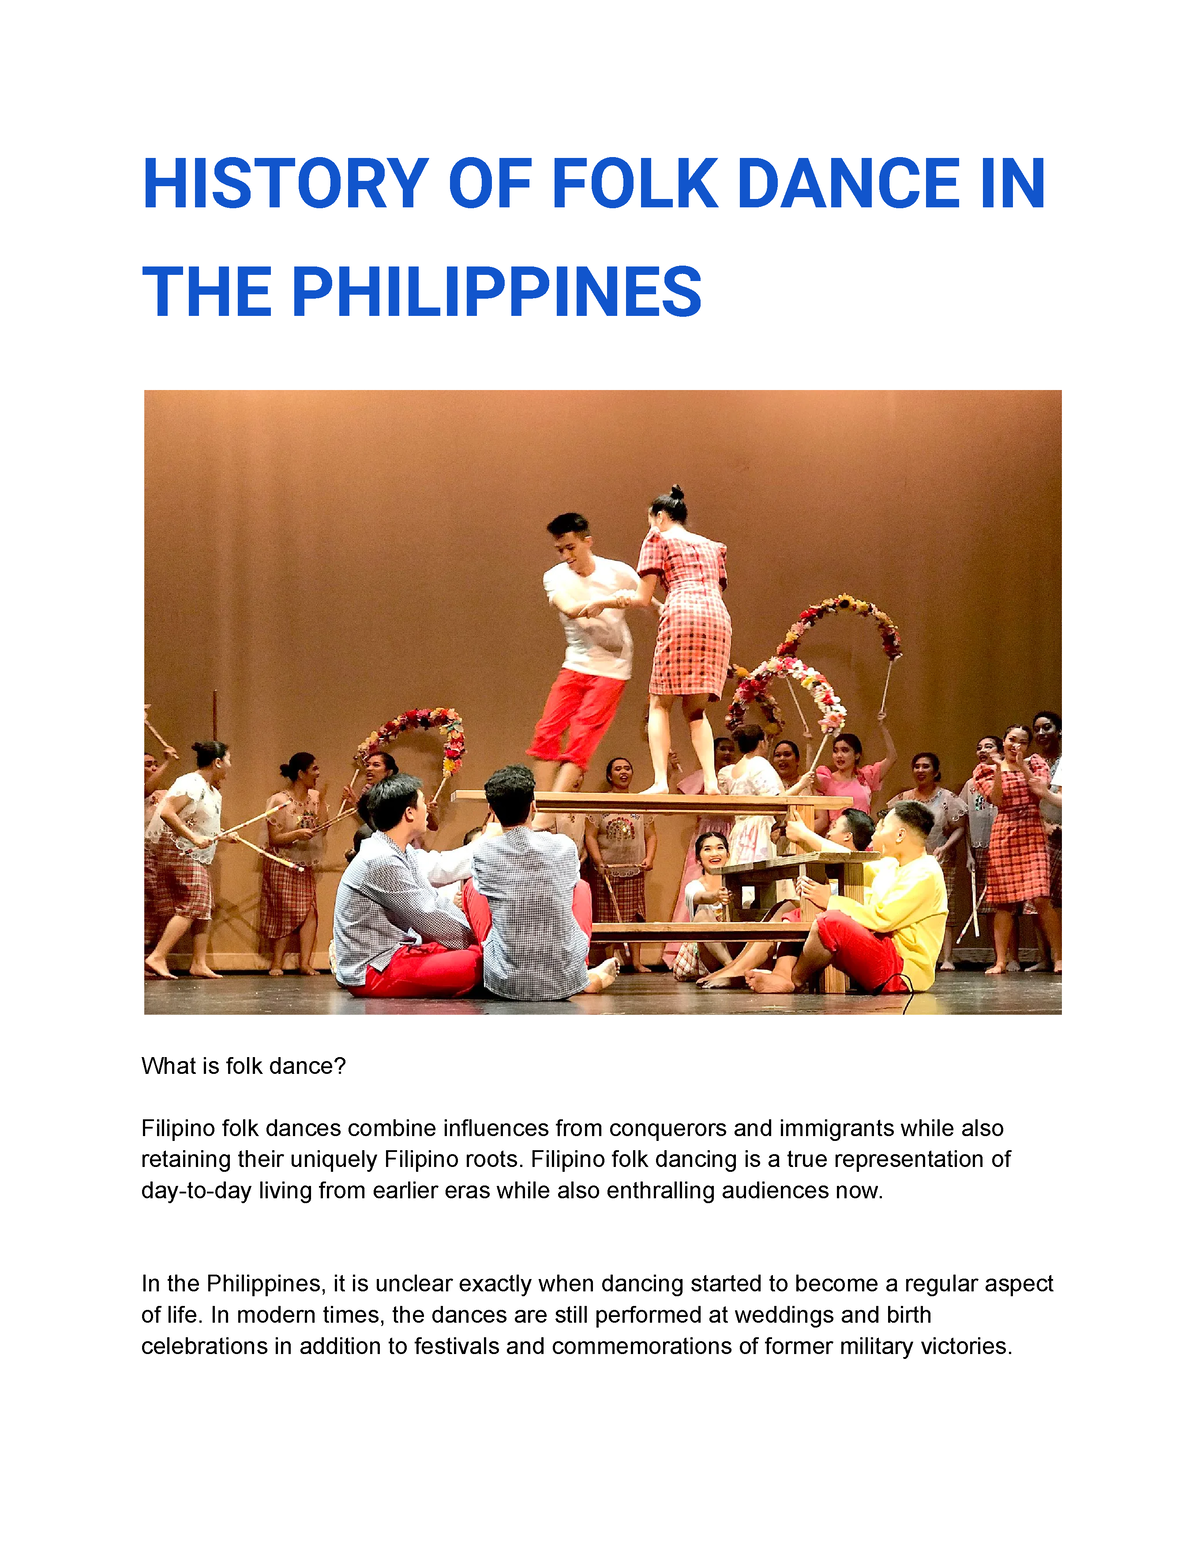 research project on the history of dance in the philippines